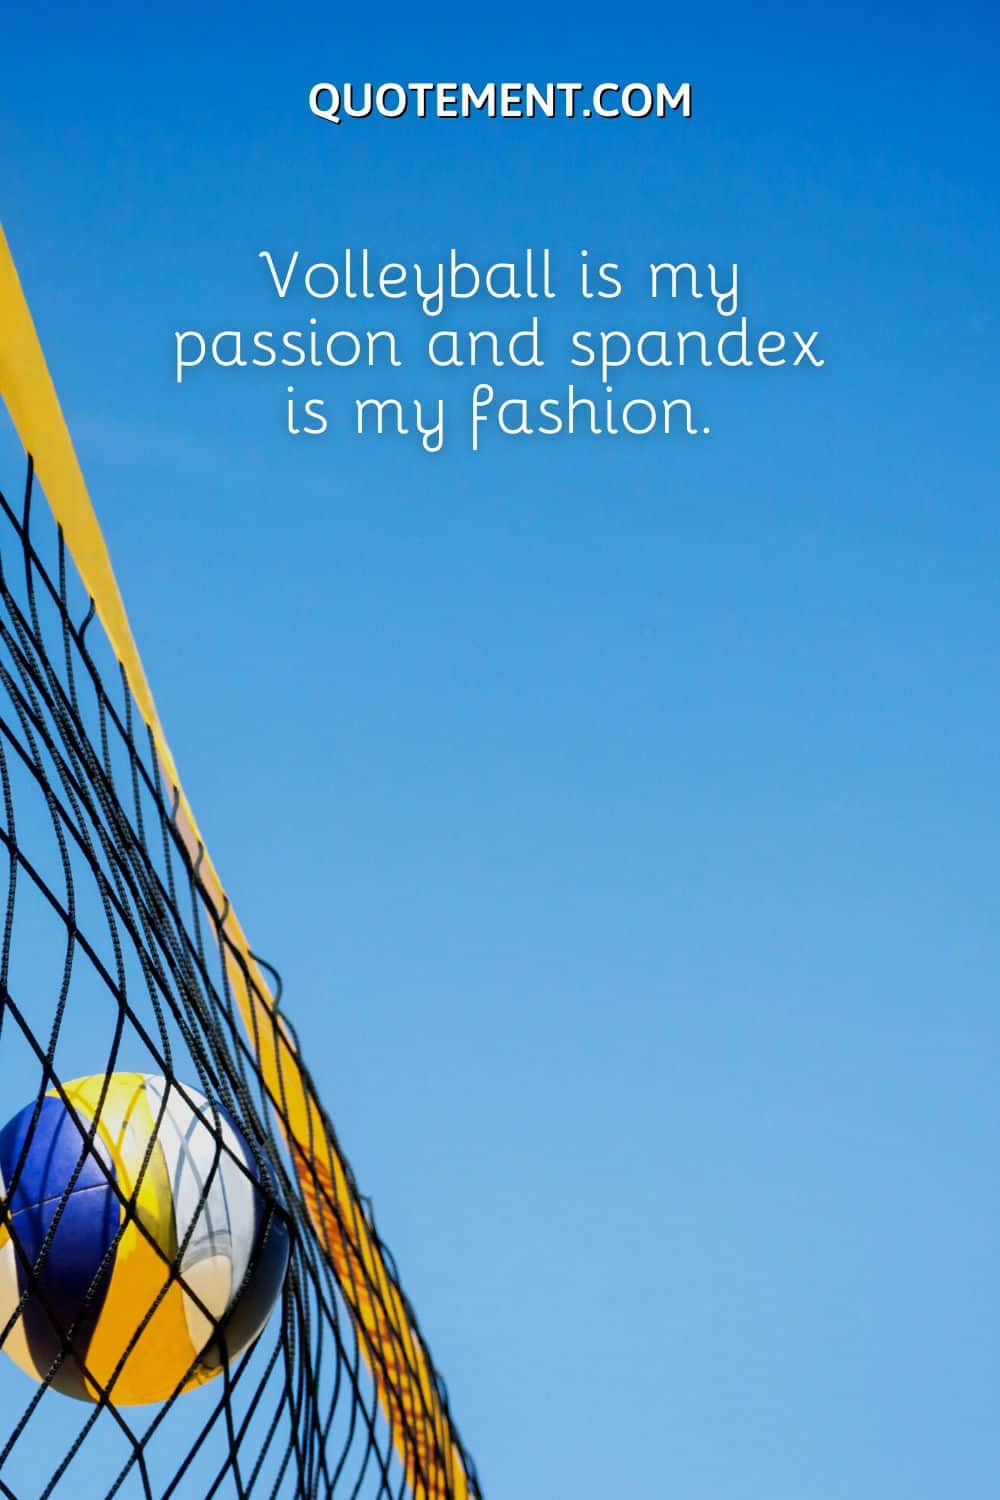 Volleyball is my passion and spandex is my fashion.